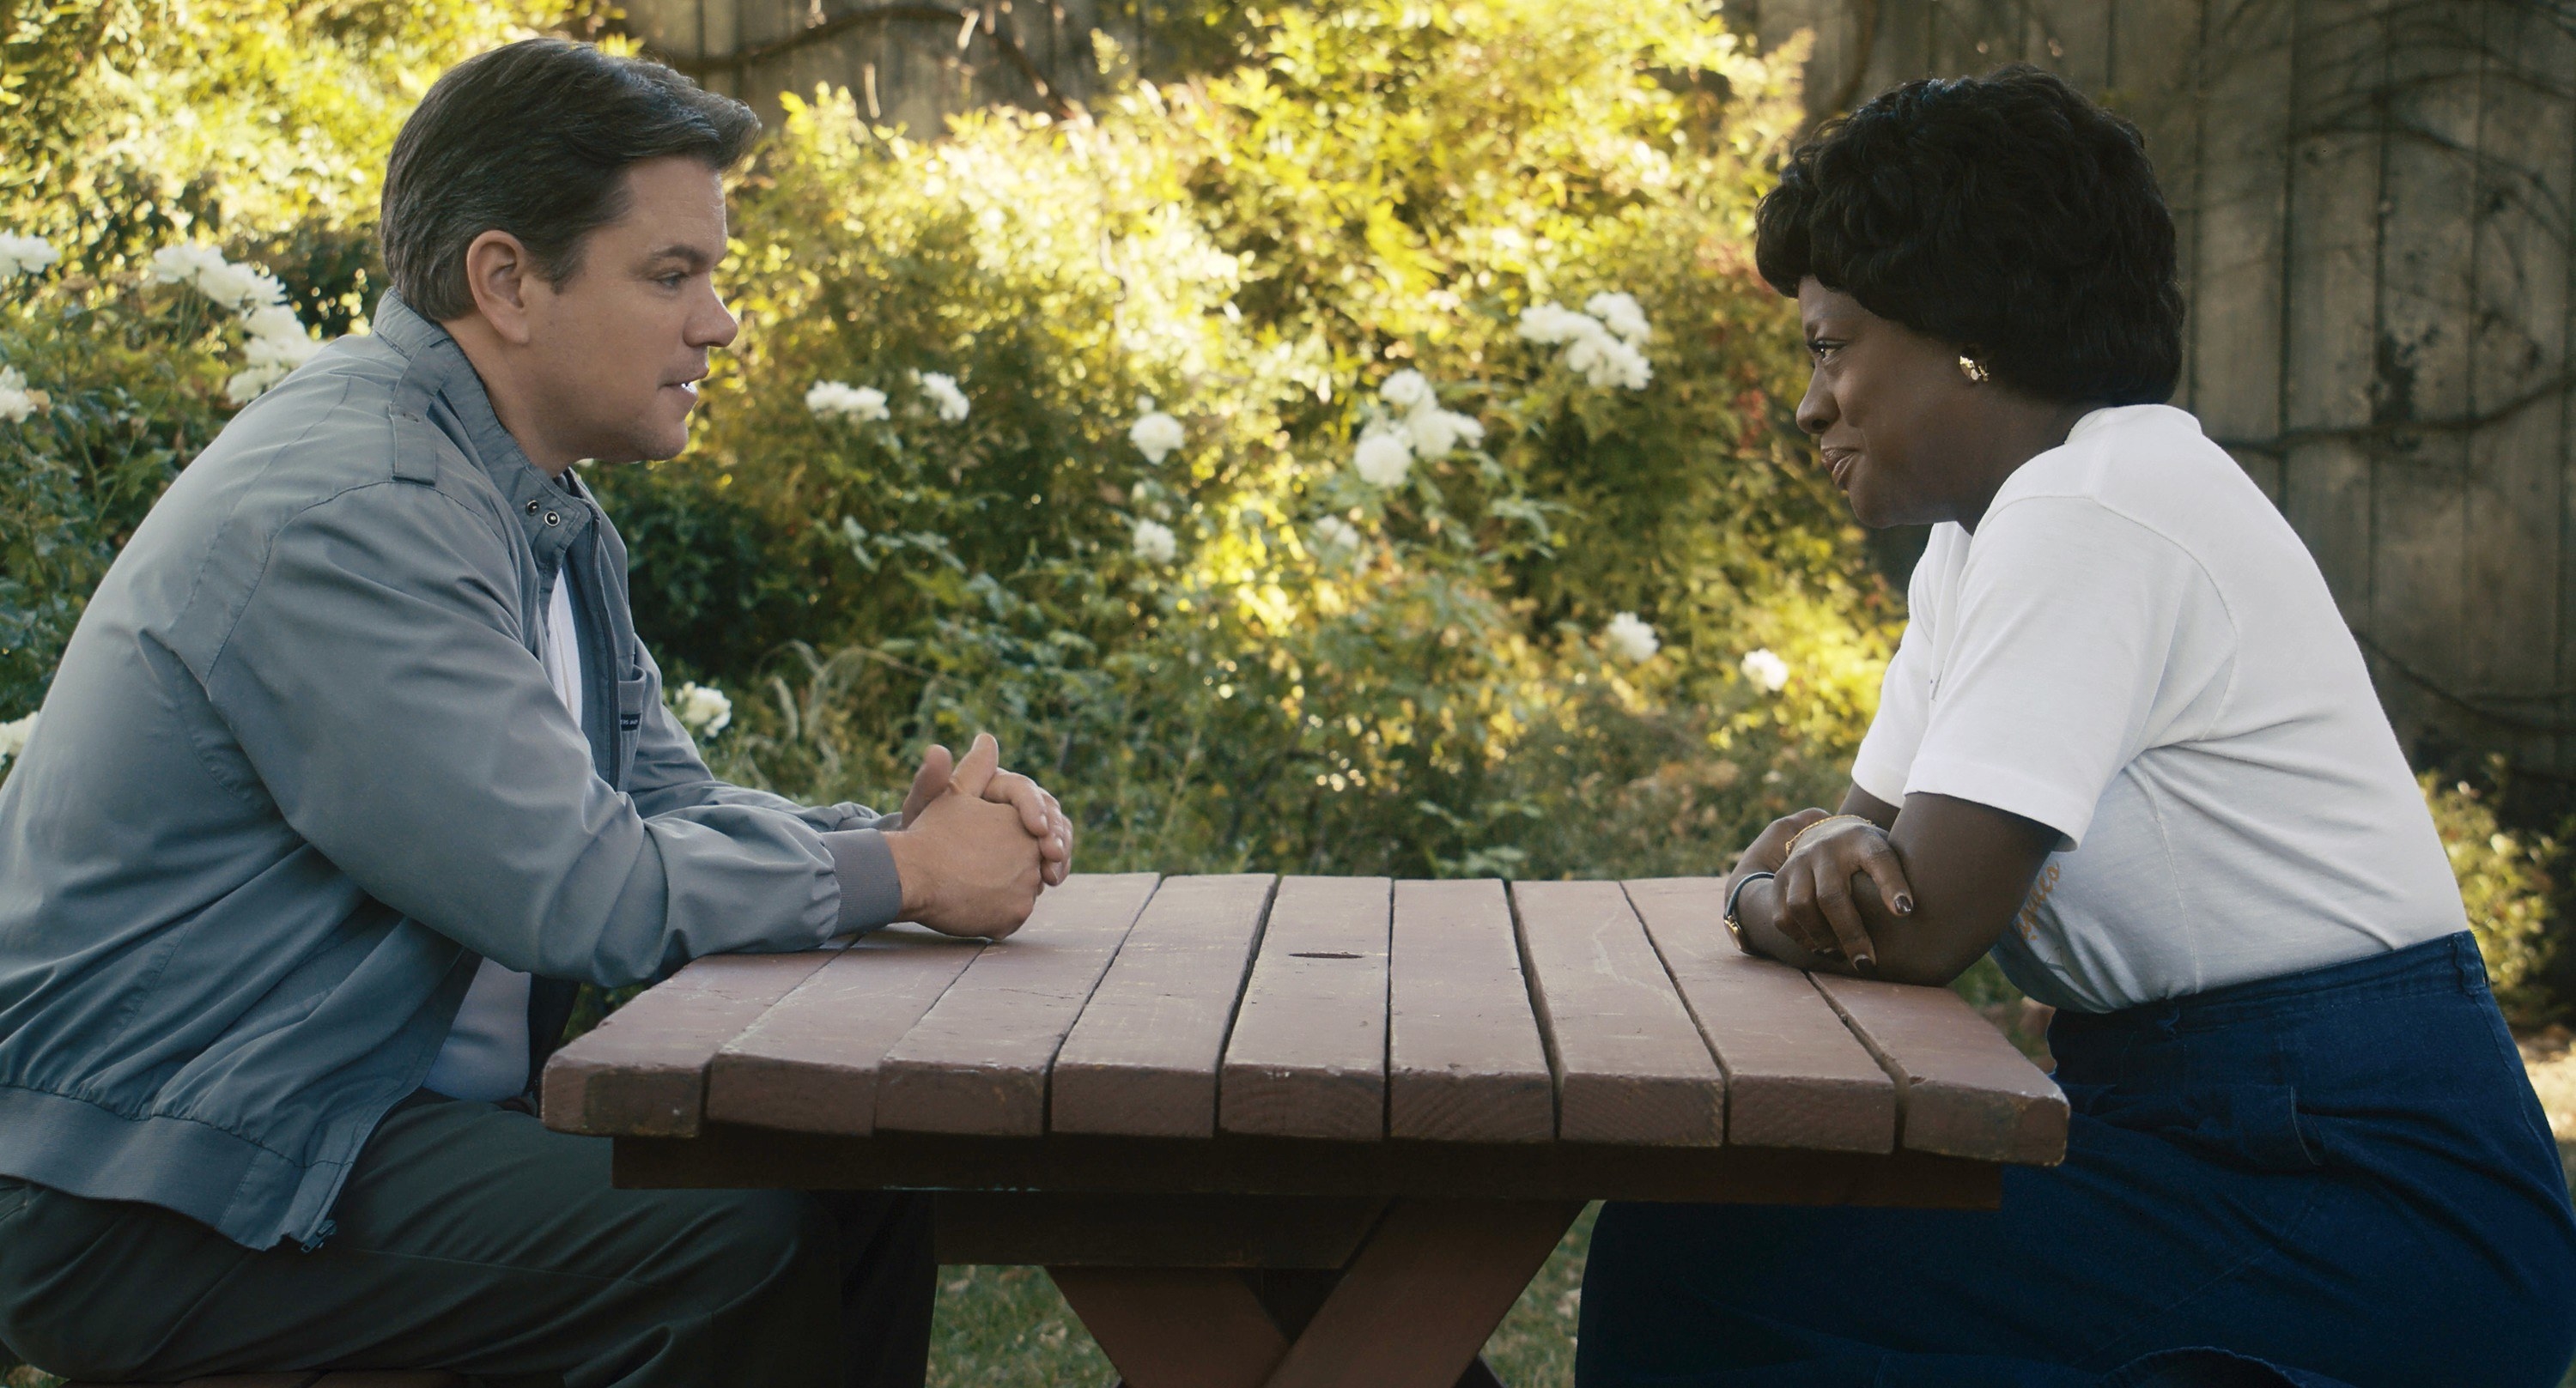 A man and a woman sit across from each other at a picnic table, talking